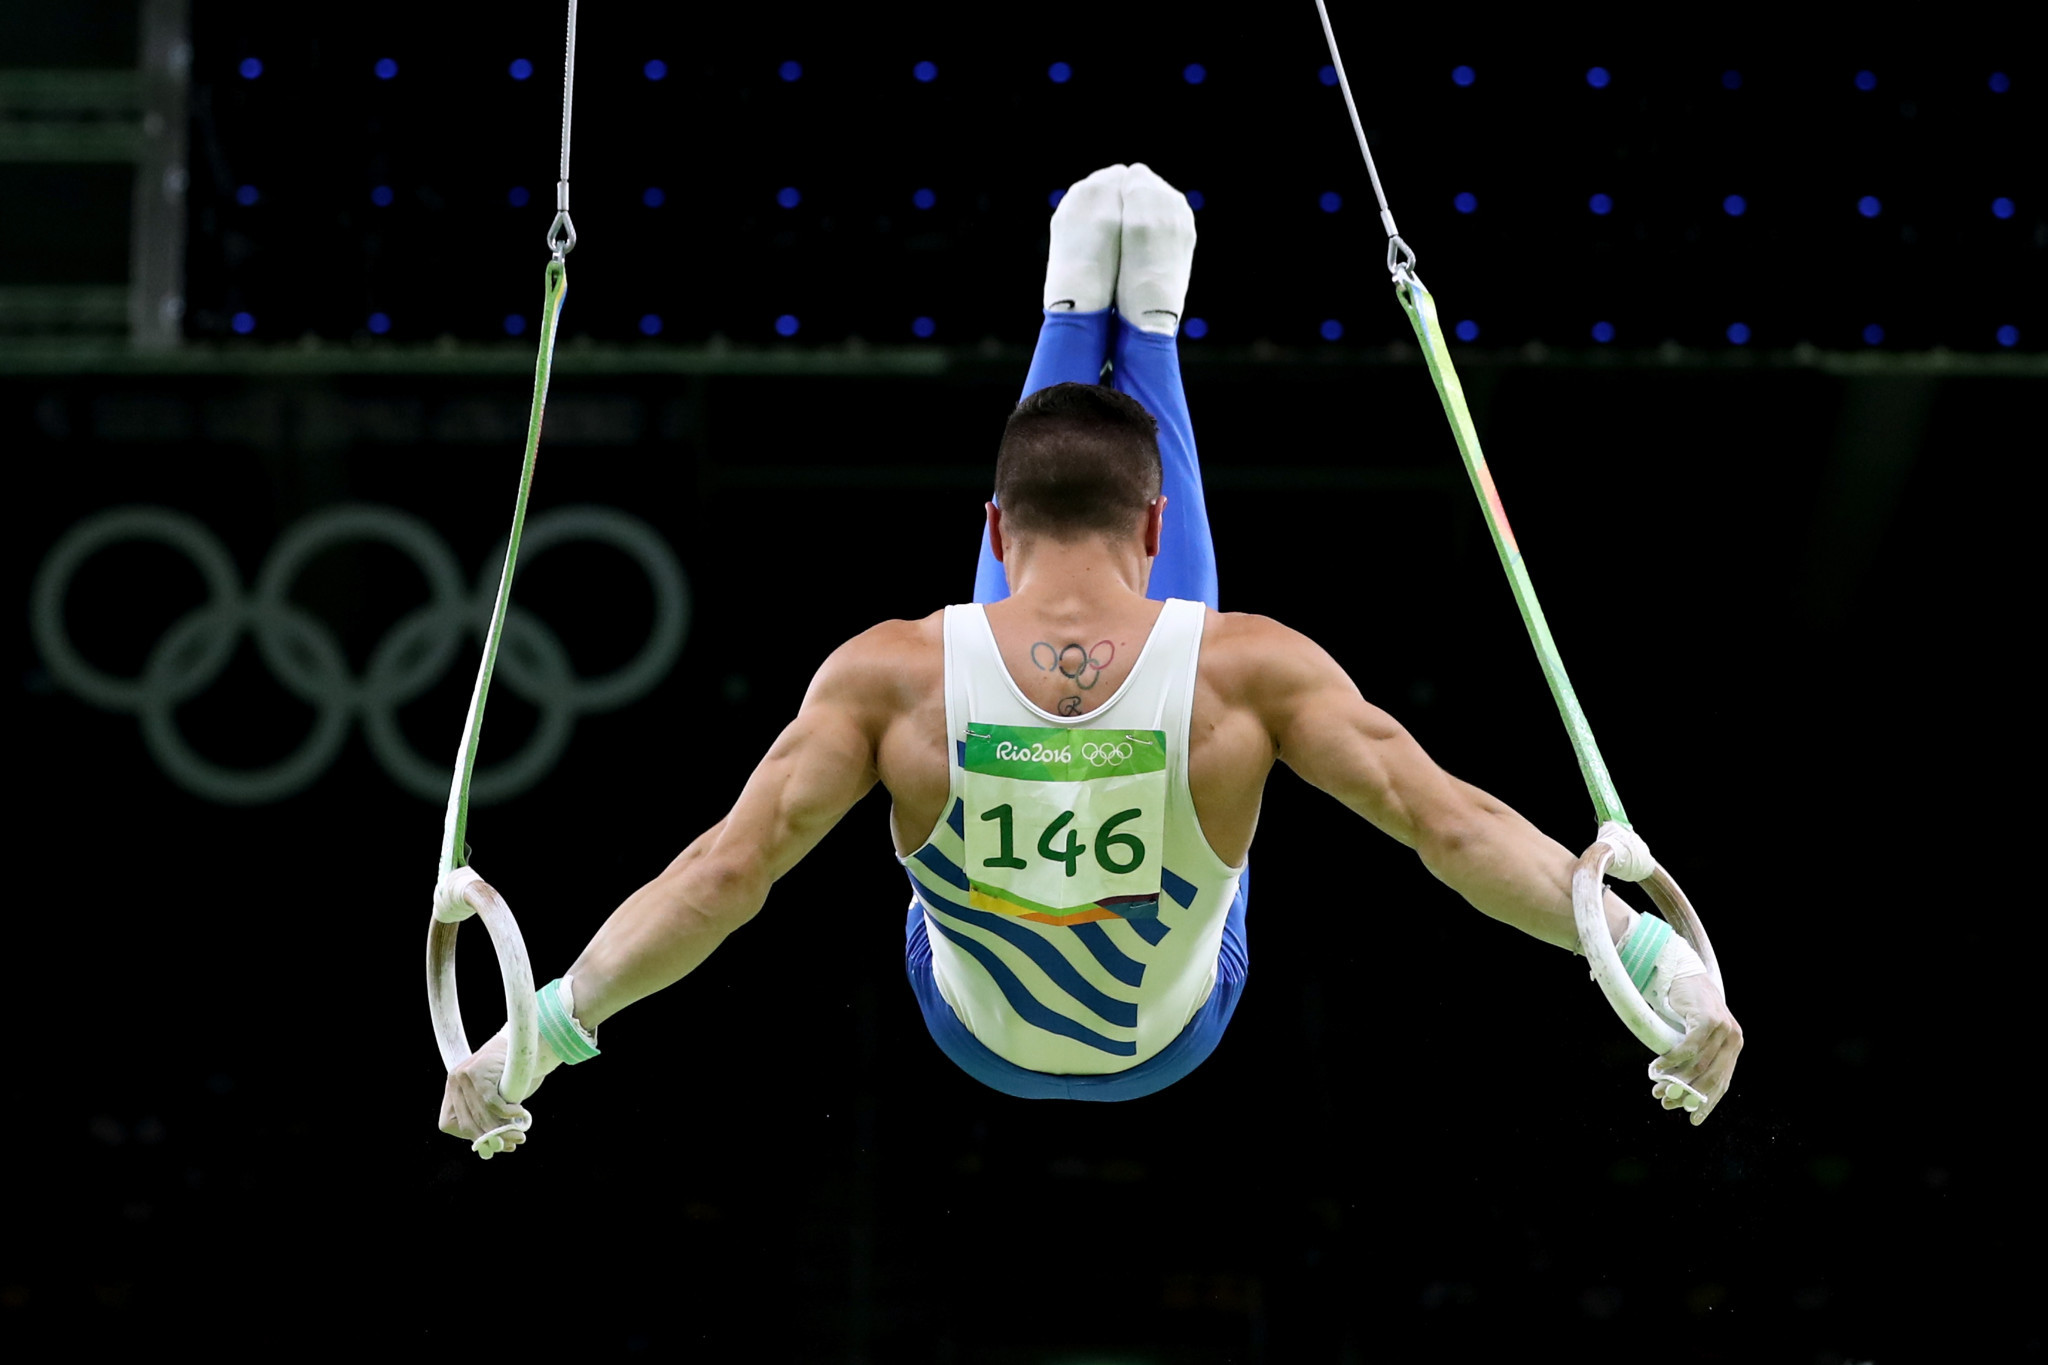 Only men compete on the rings in artistic gymnastics events ©Getty Images